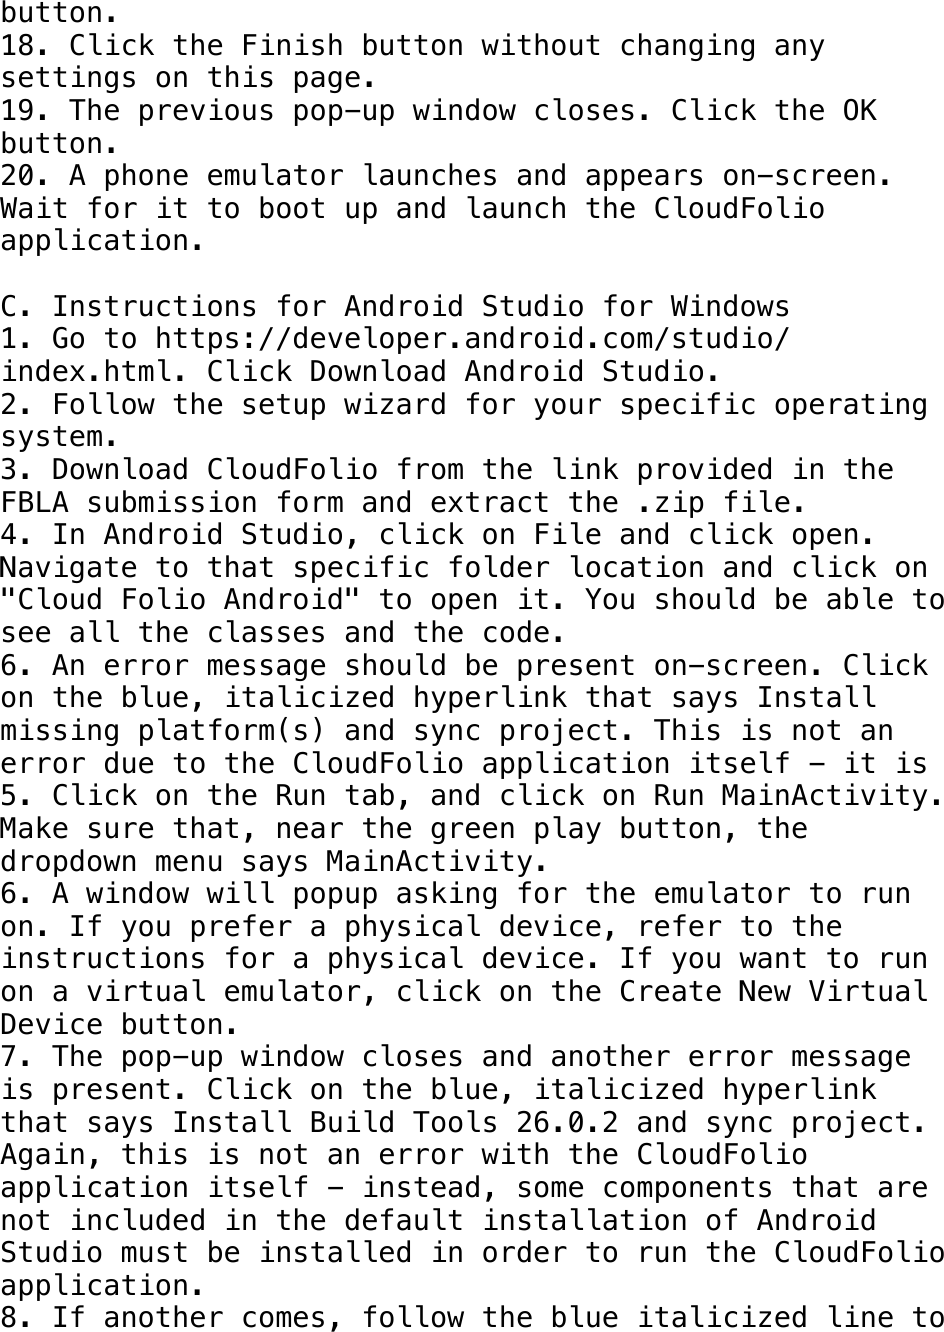 Page 8 of 10 - Cloud Folio Instructions